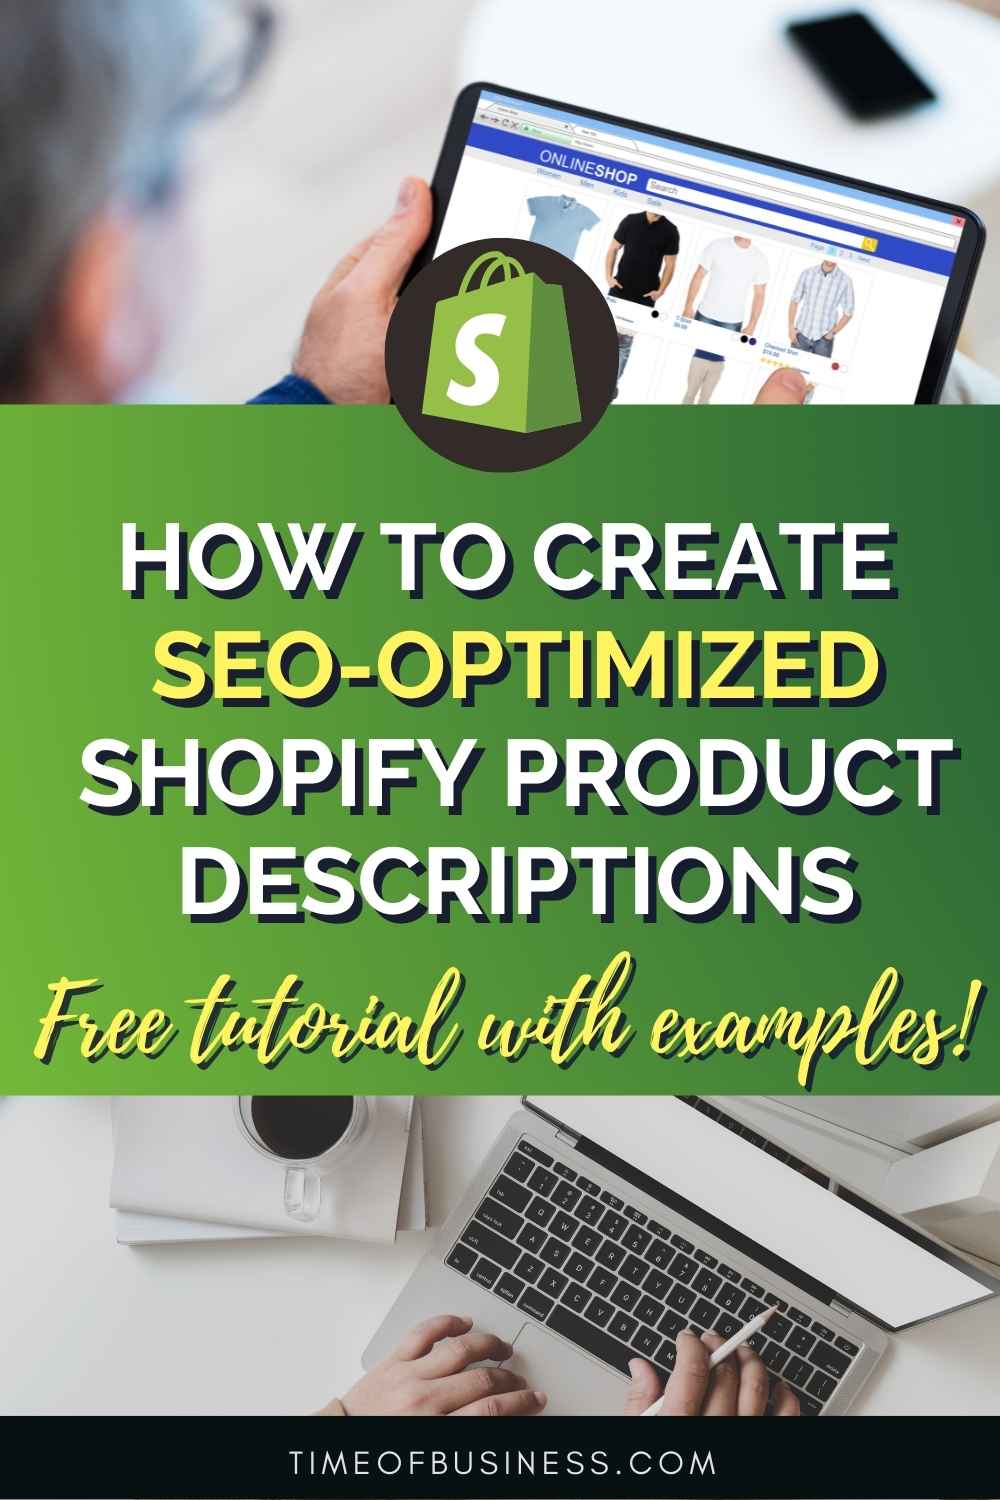 How to create seo-optimized shopify product descriptions